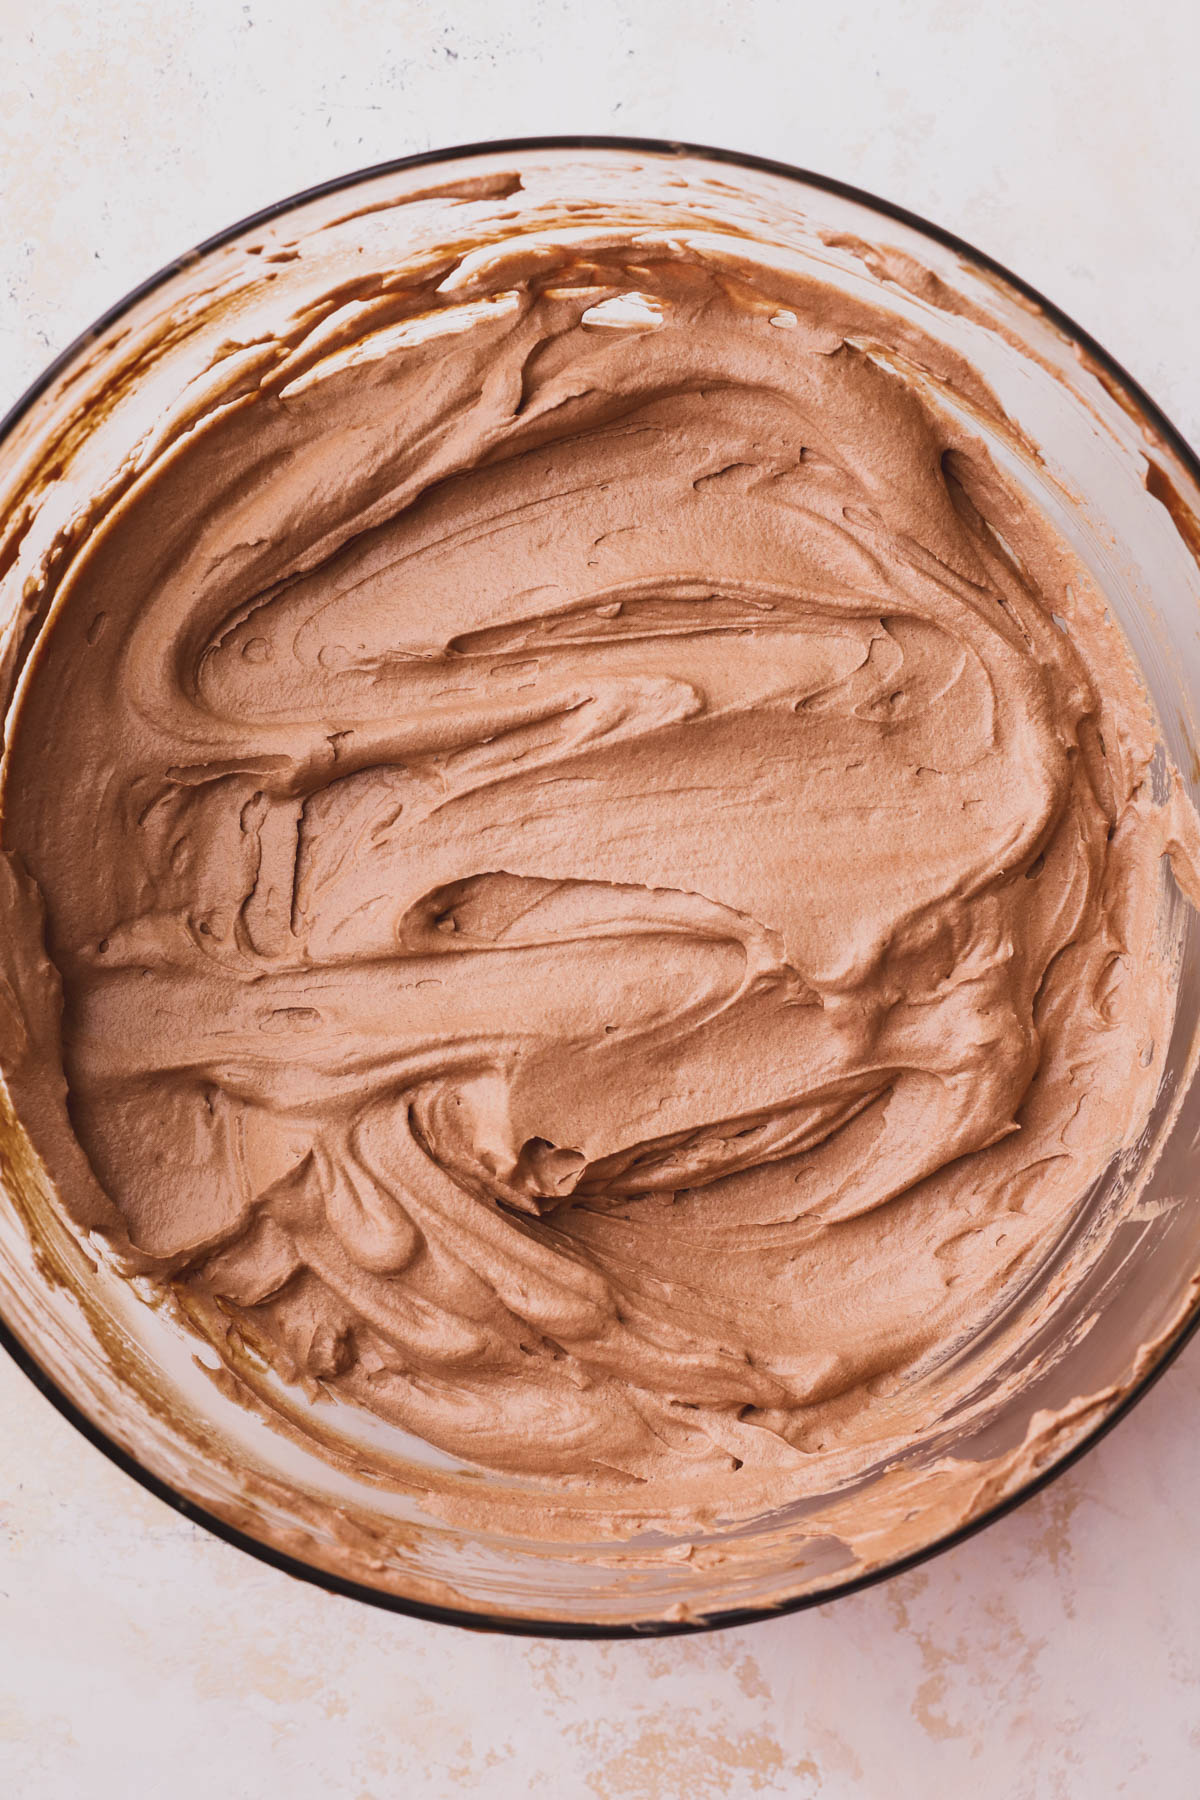 Chocolate mixture combined with whipped cream. 